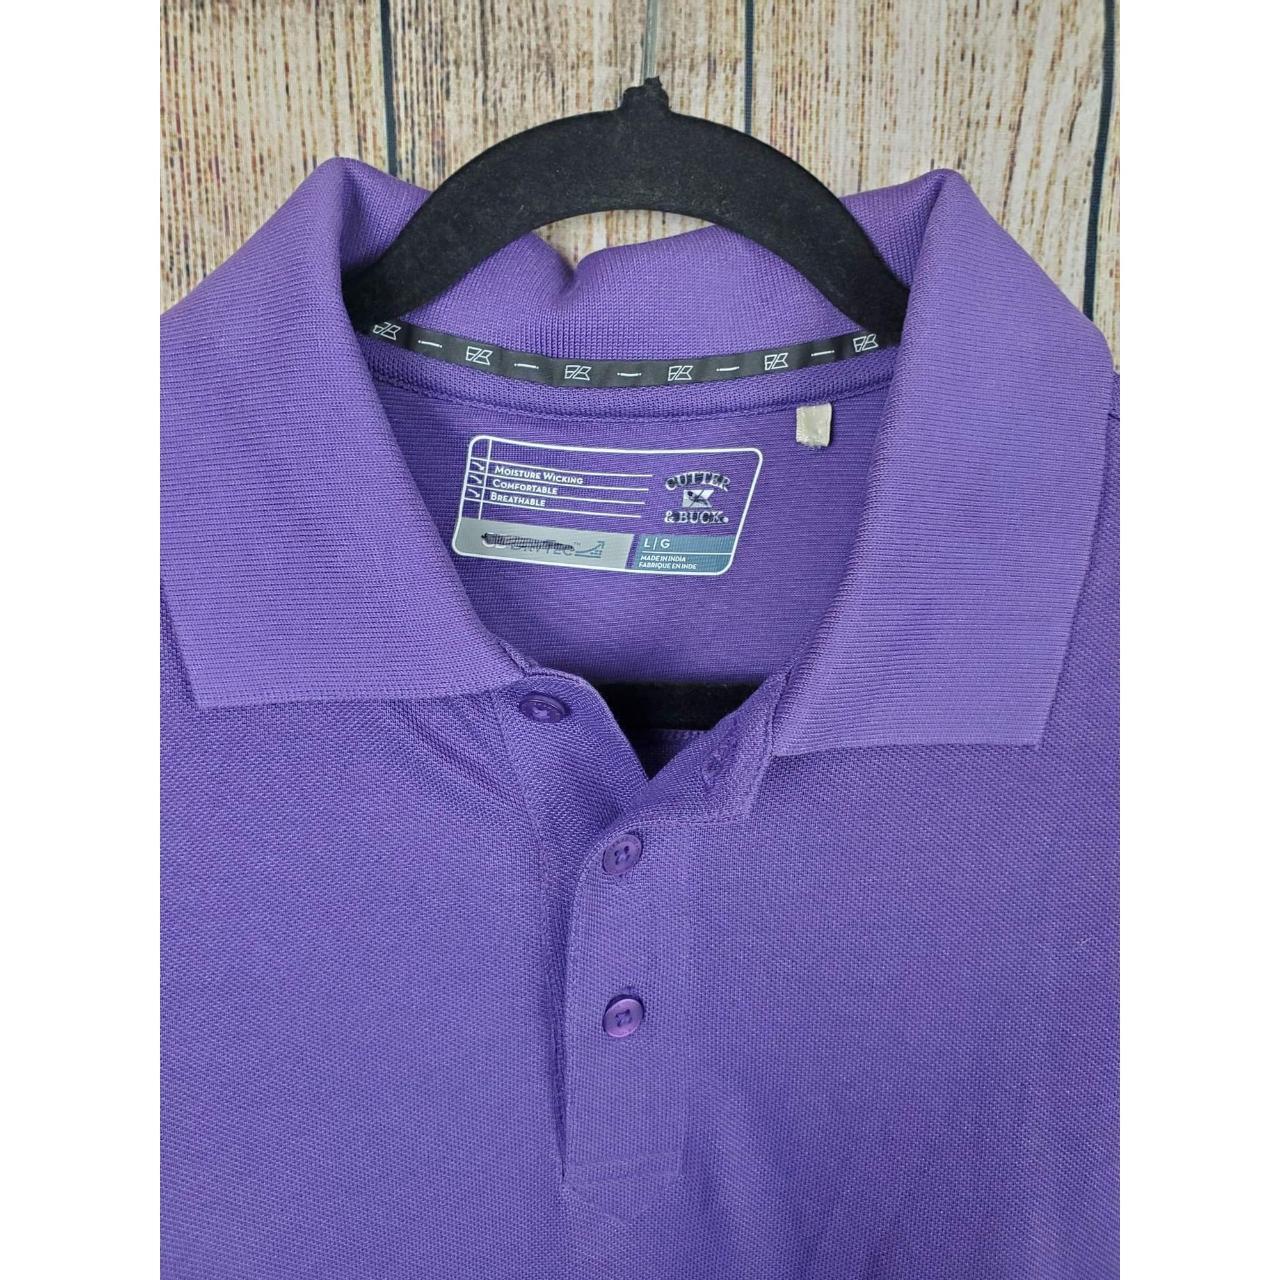 Product Image 2 - Lg Cutter & Buck Polo
Brand: